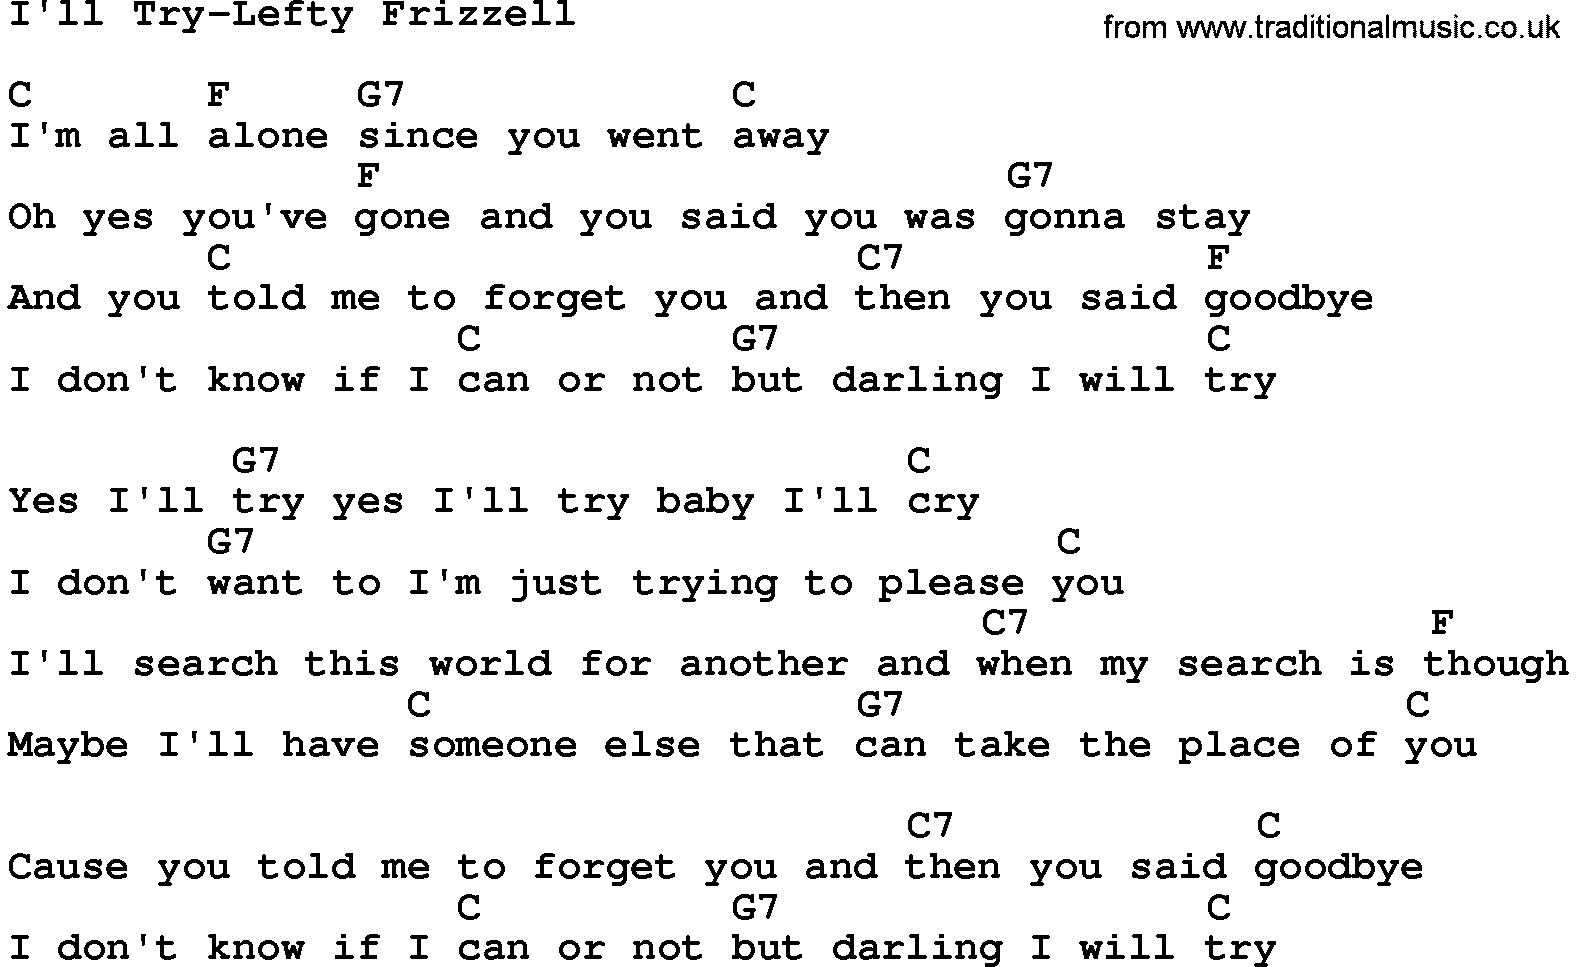 Country music song: I'll Try-Lefty Frizzell lyrics and chords